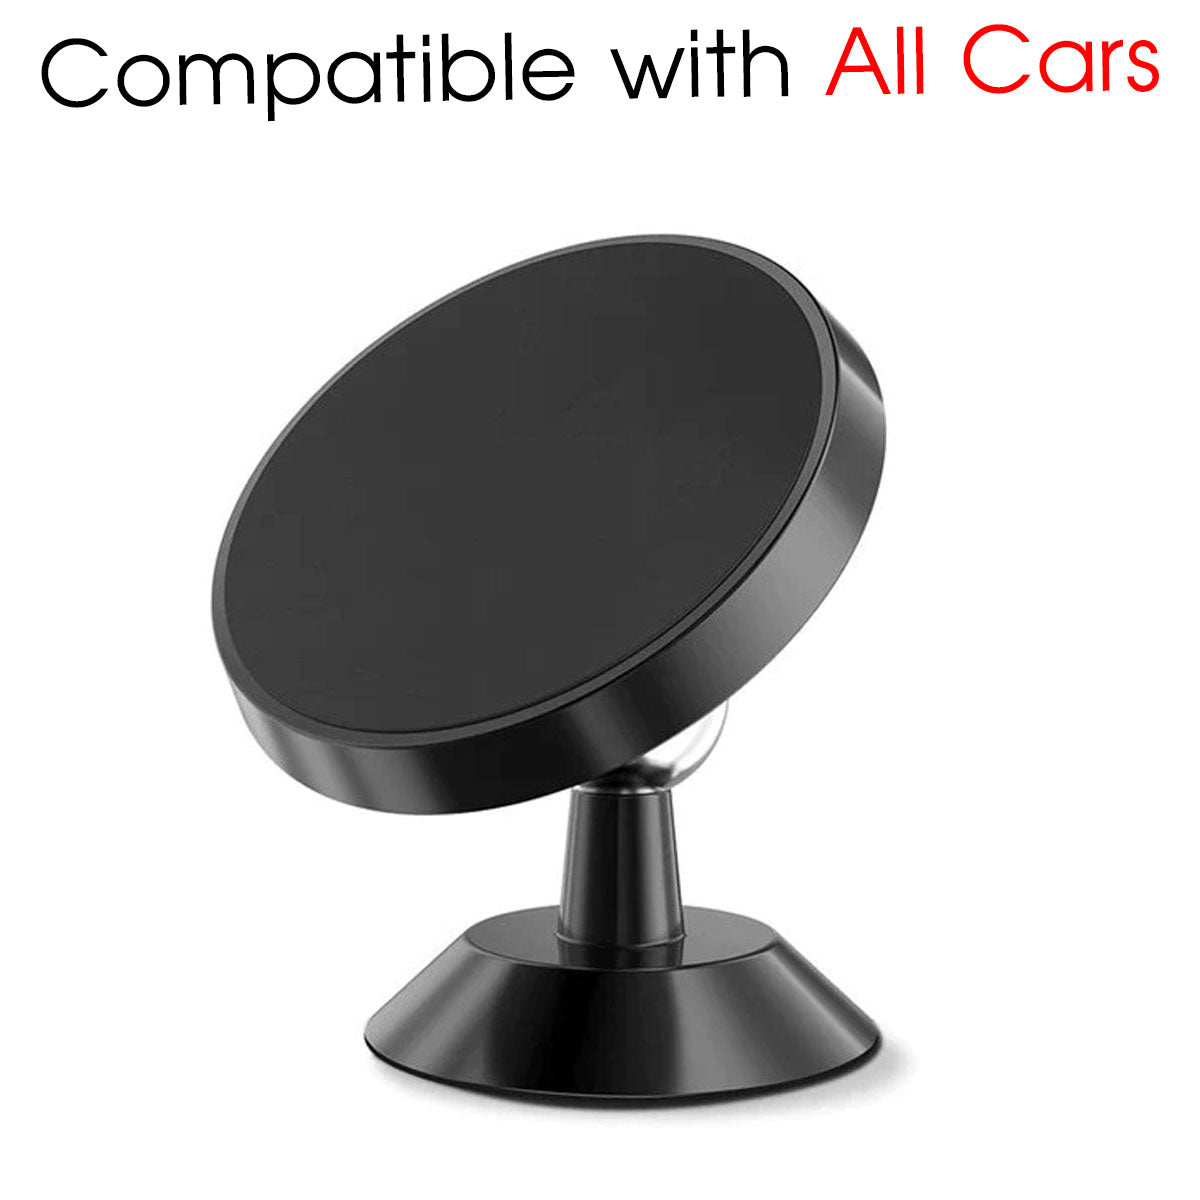 [2 Pack ] Magnetic Phone Mount, Custom For Your Cars, [ Super Strong Magnet ] [ with 4 Metal Plate ] car Magnetic Phone Holder, [ 360° Rotation ] Universal Dashboard car Mount Fits All Cell Phones, Car Accessories SU13982